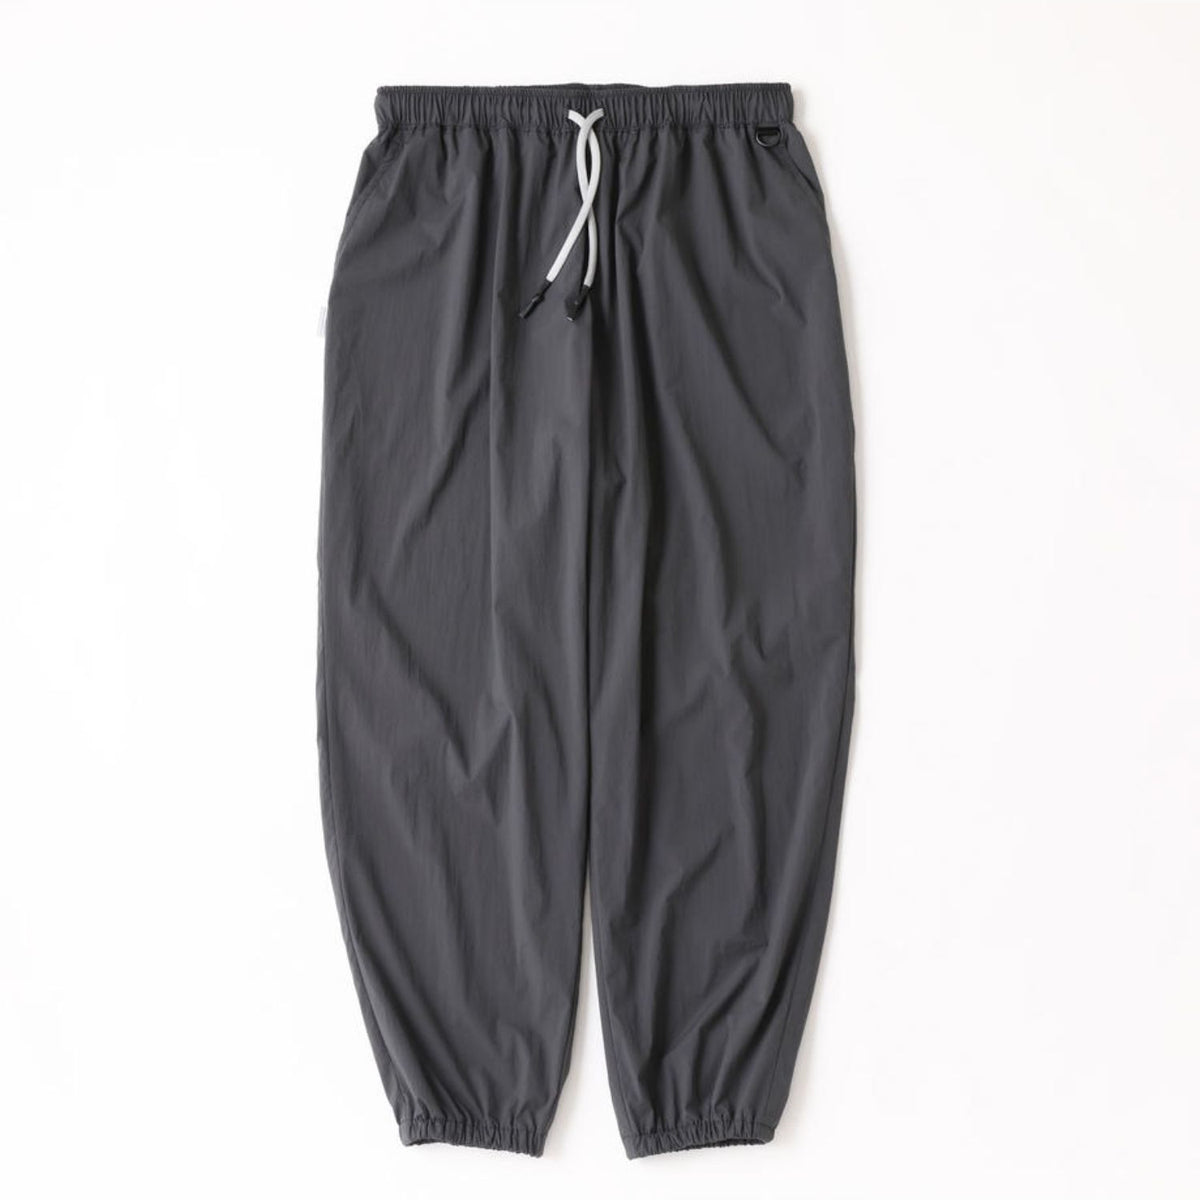 Wide Sporty Pants - S.F.C (Stripes For Creative) (エスエフシー 